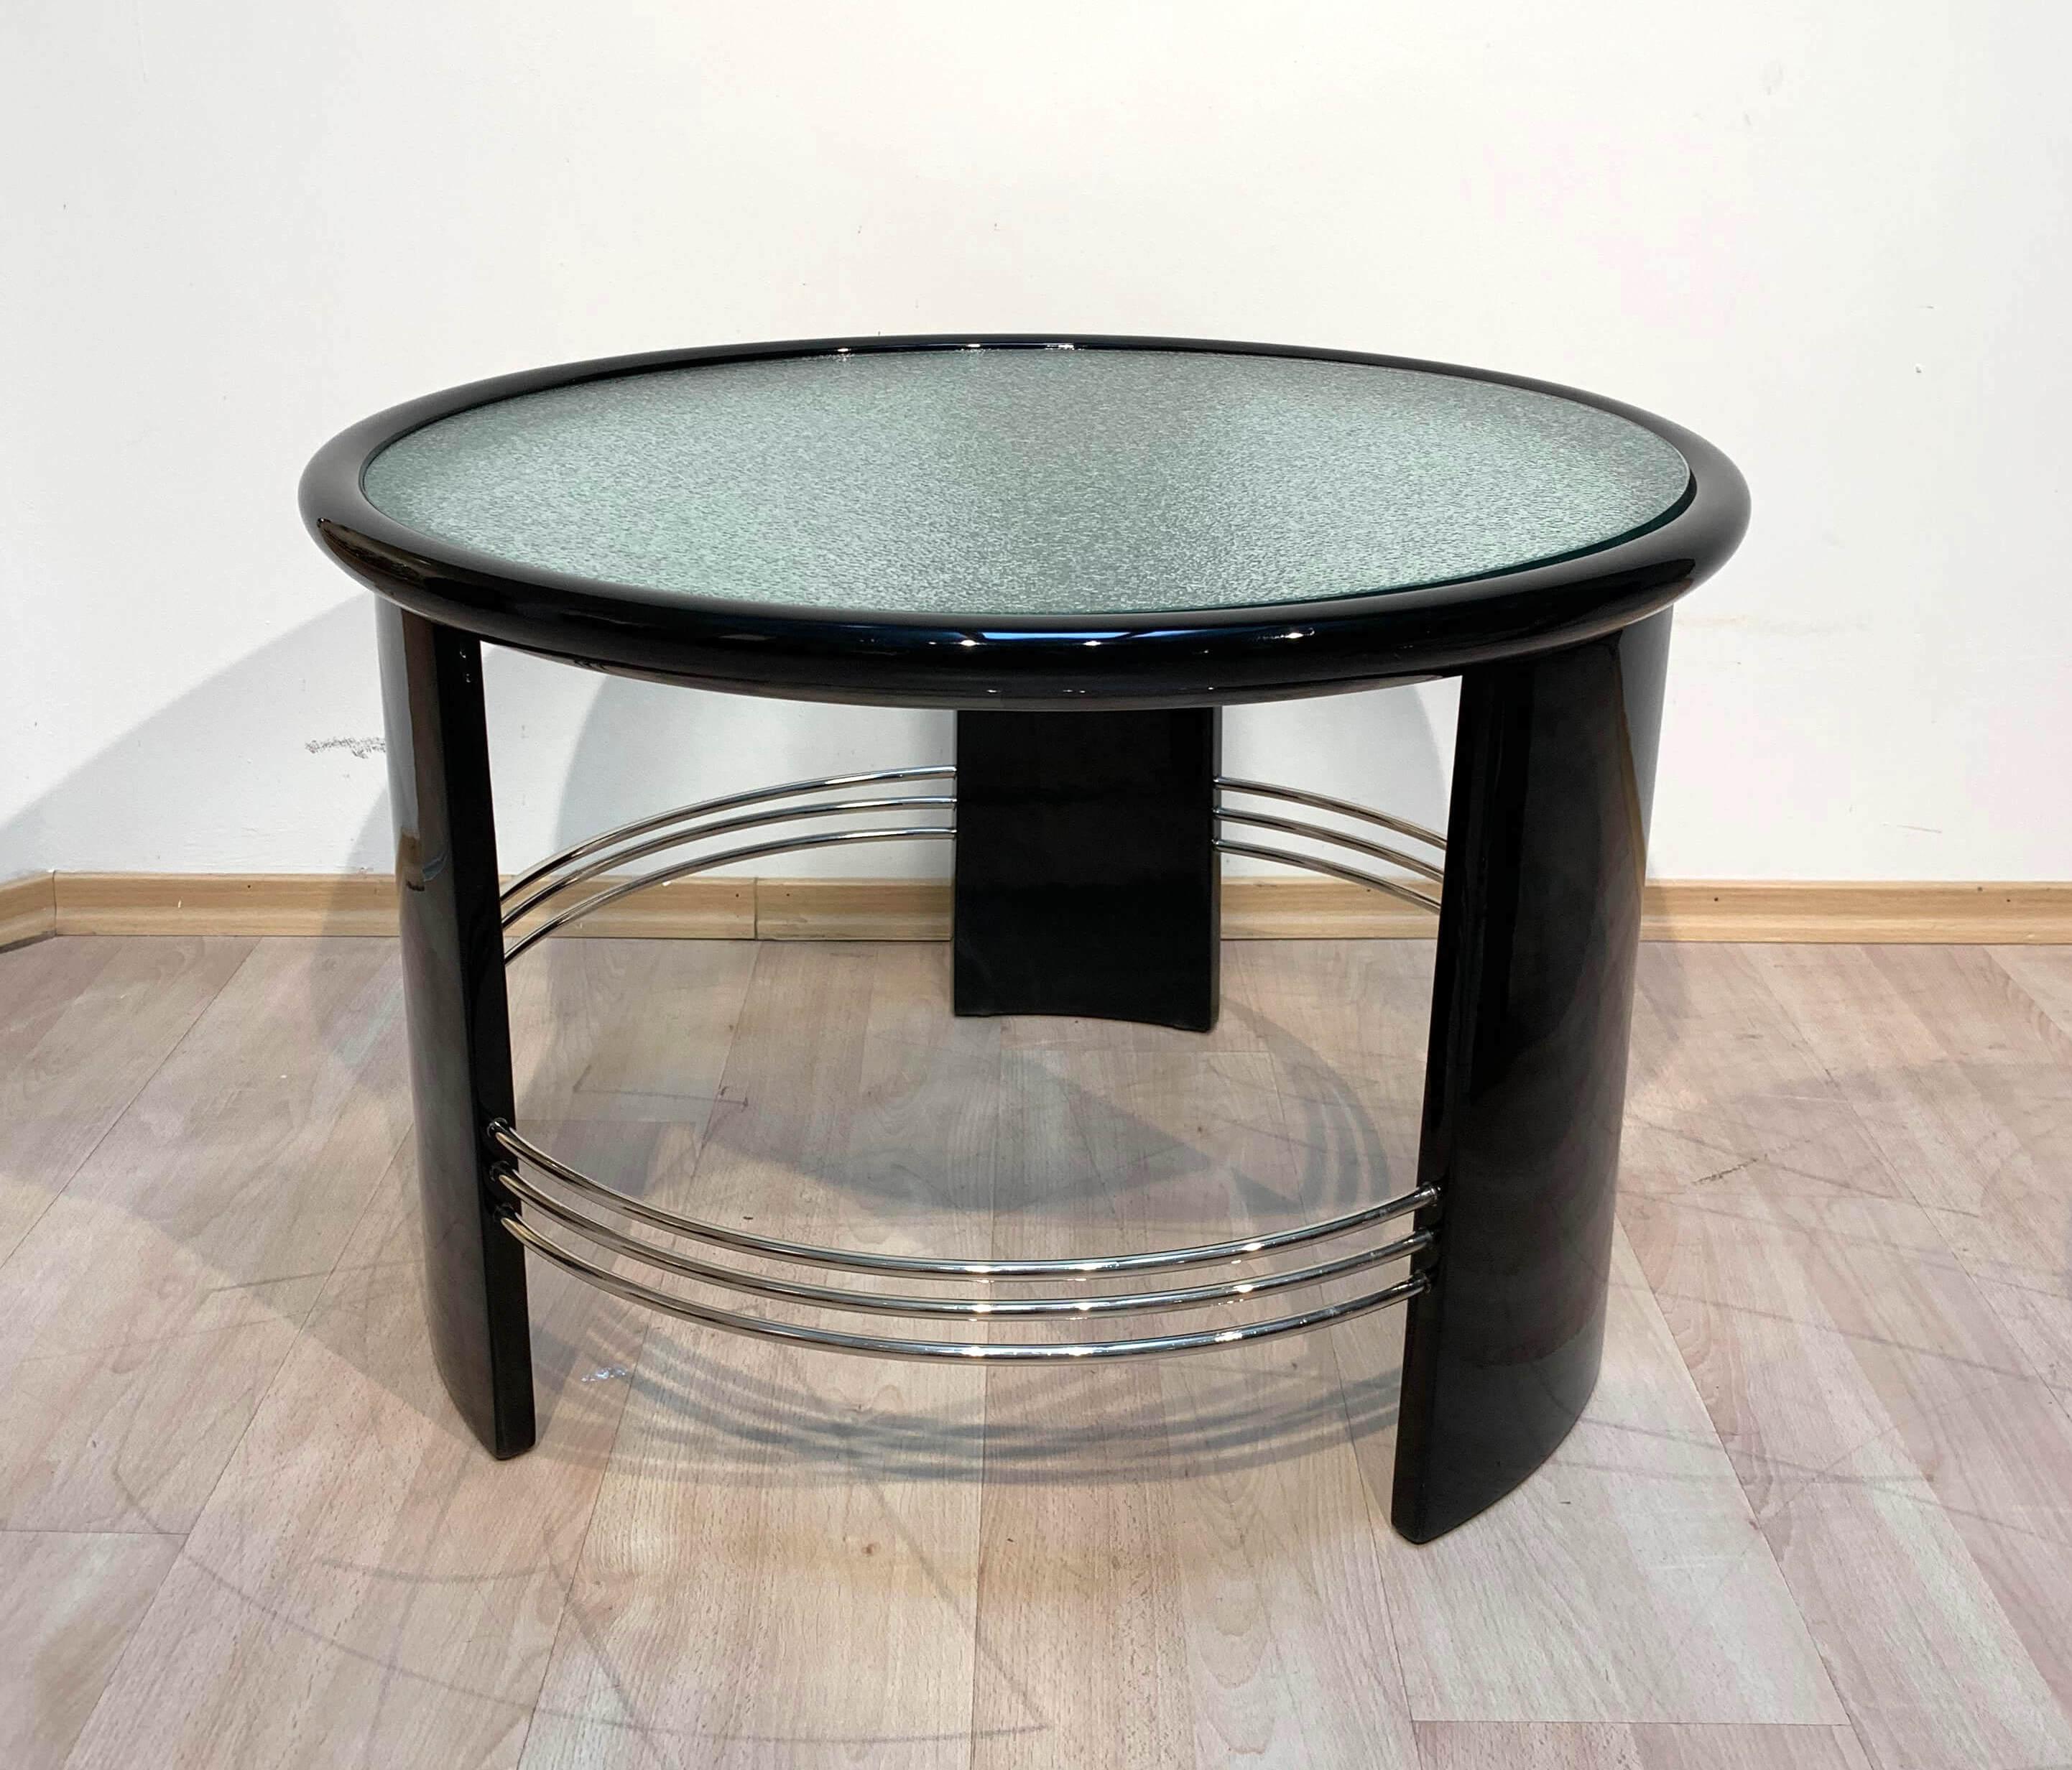 Polished Pair of large Art Deco Sofa Tables, Glass, Black Lacquer, Nickel, France, 1930s